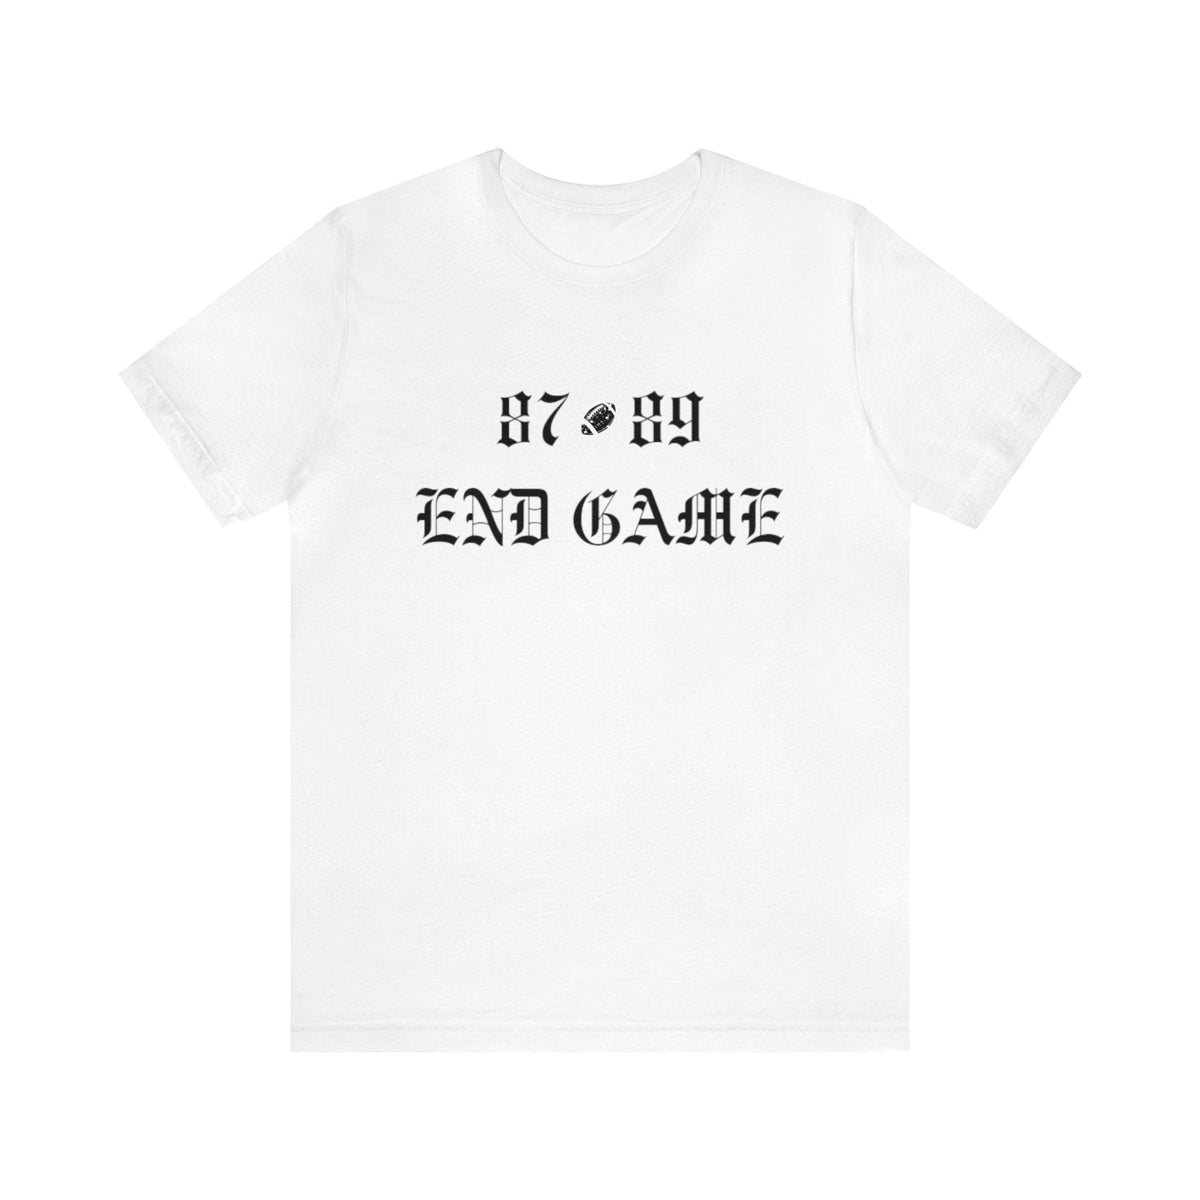 End Game 87 89 Short Sleeve Graphic Tee | 1989 T-shirt | Swiftie Shirt T-Shirt TheFringeCultureCollective